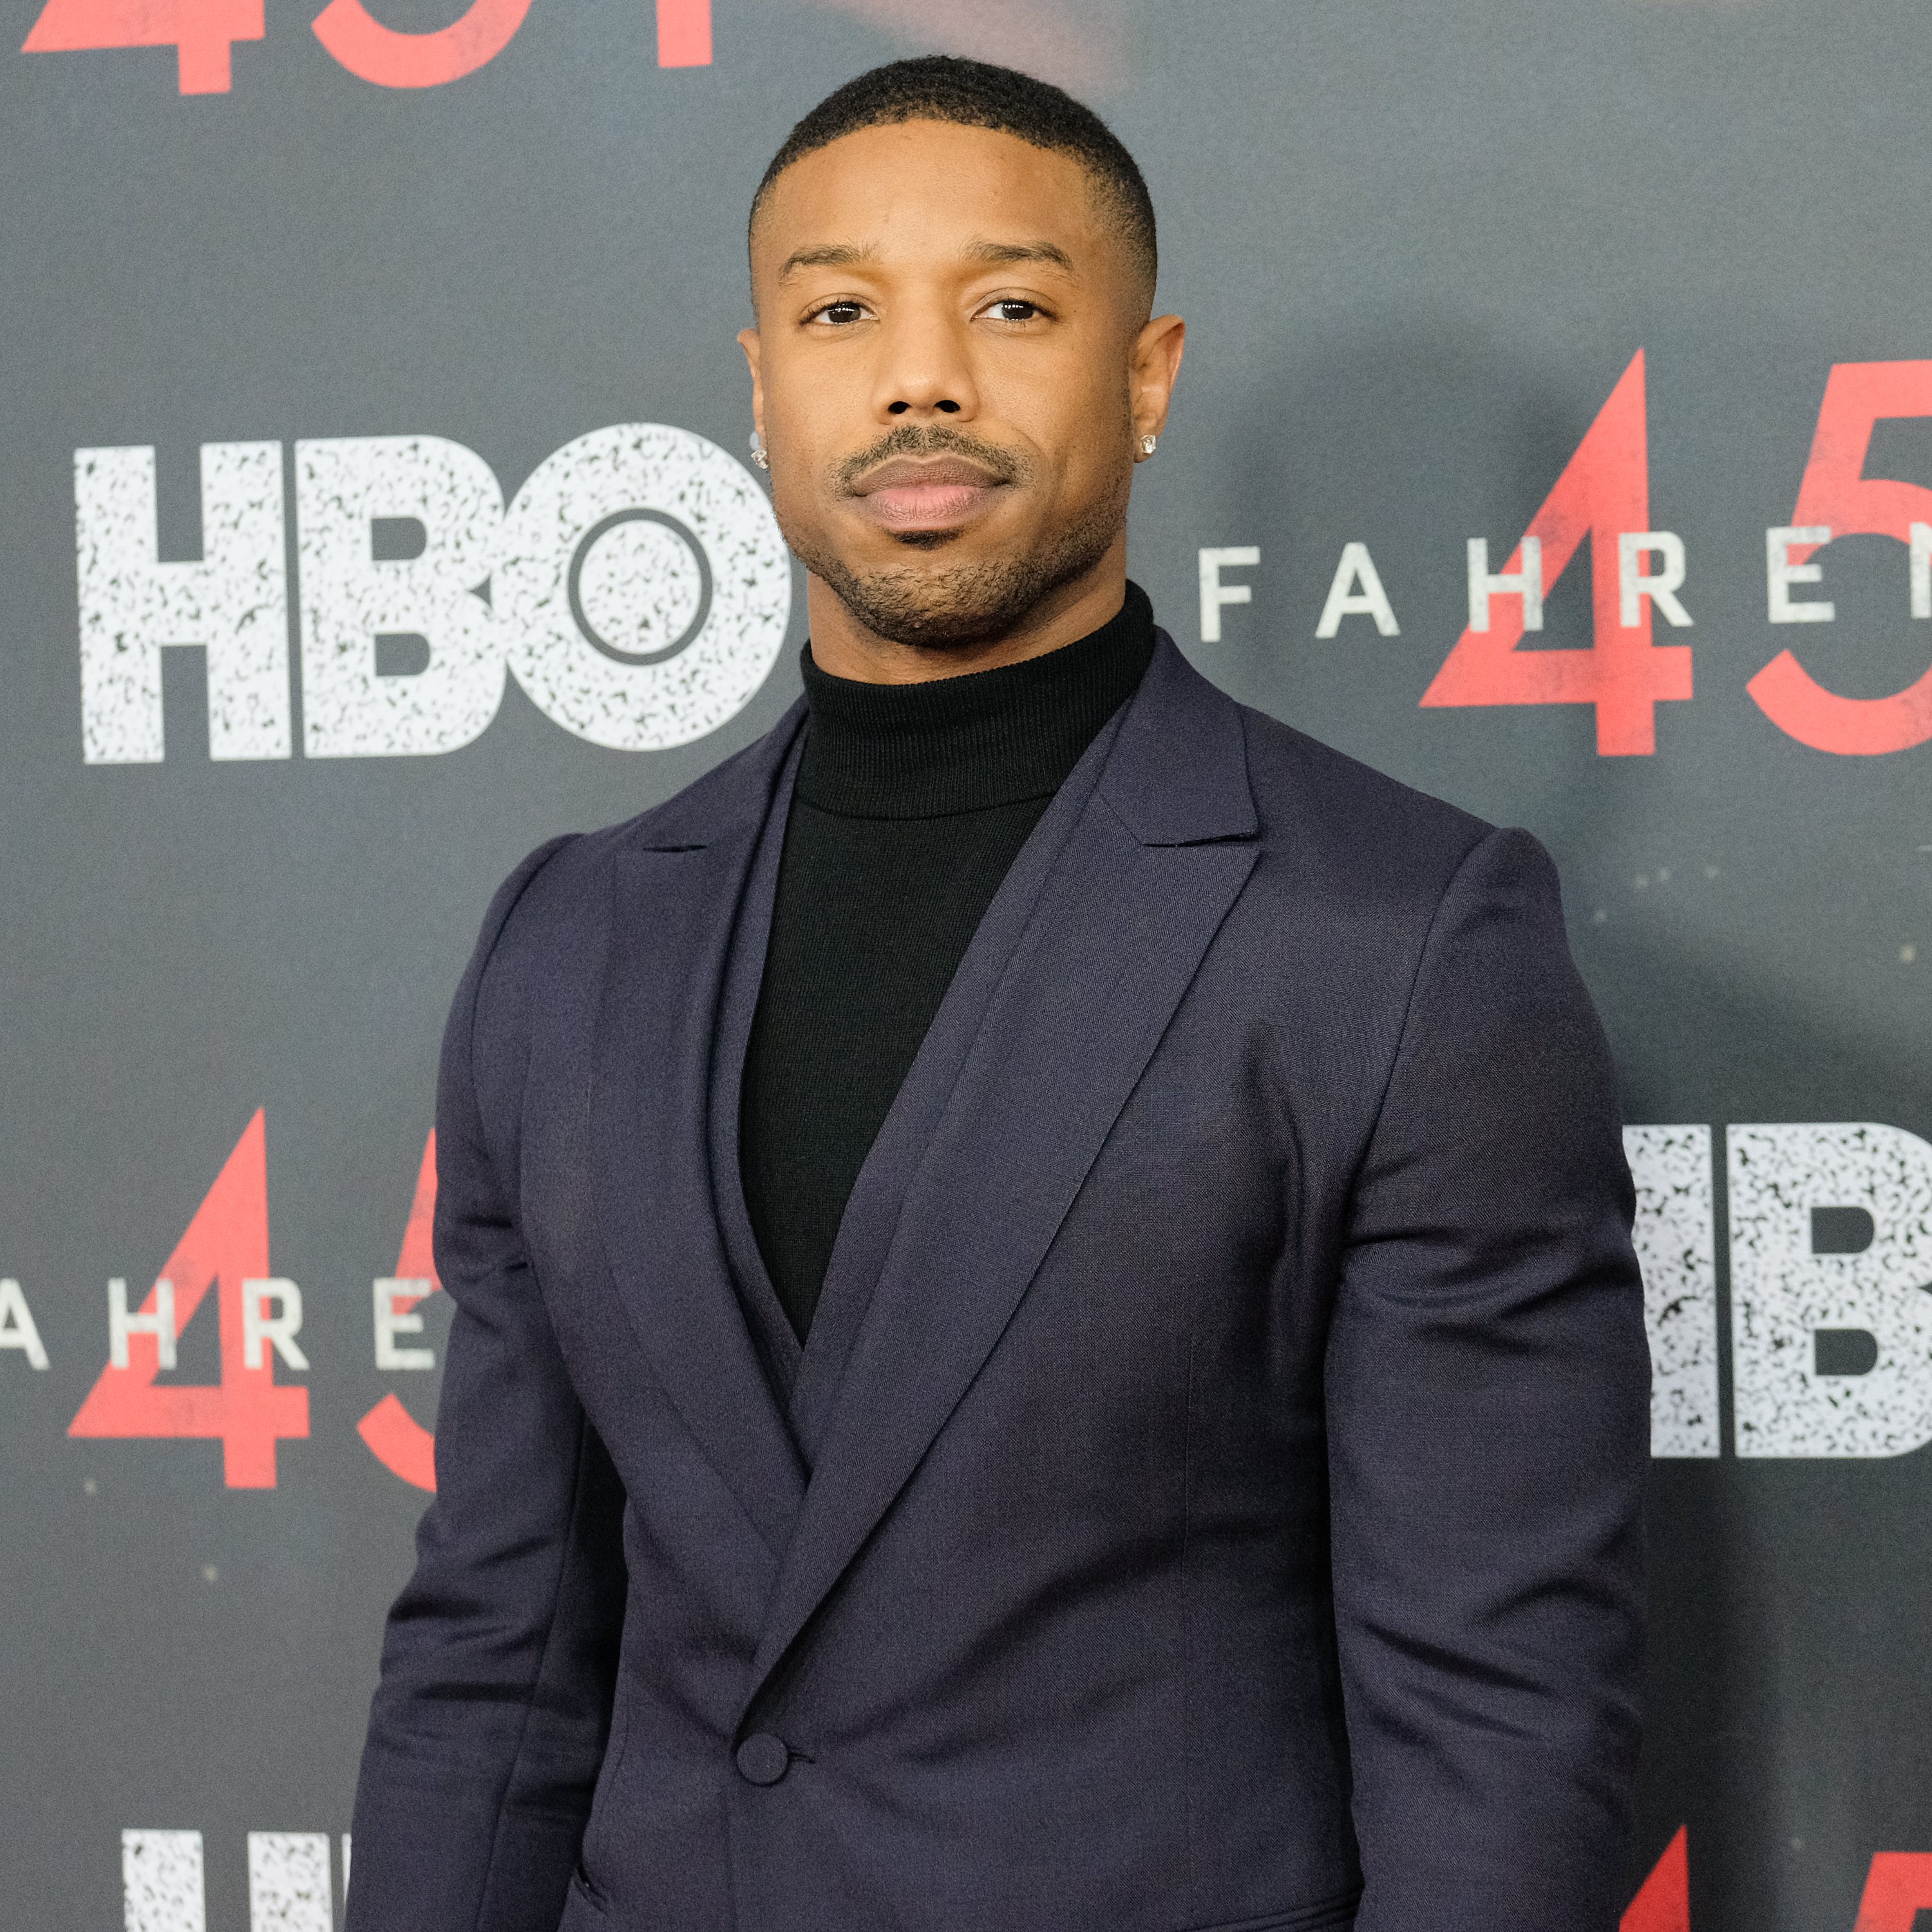 Michael B. Jordan at the New York premiere of  "Fahrenheit 451" at NYU Skirball Center on May 8, 2018. | Photo: Getty Images